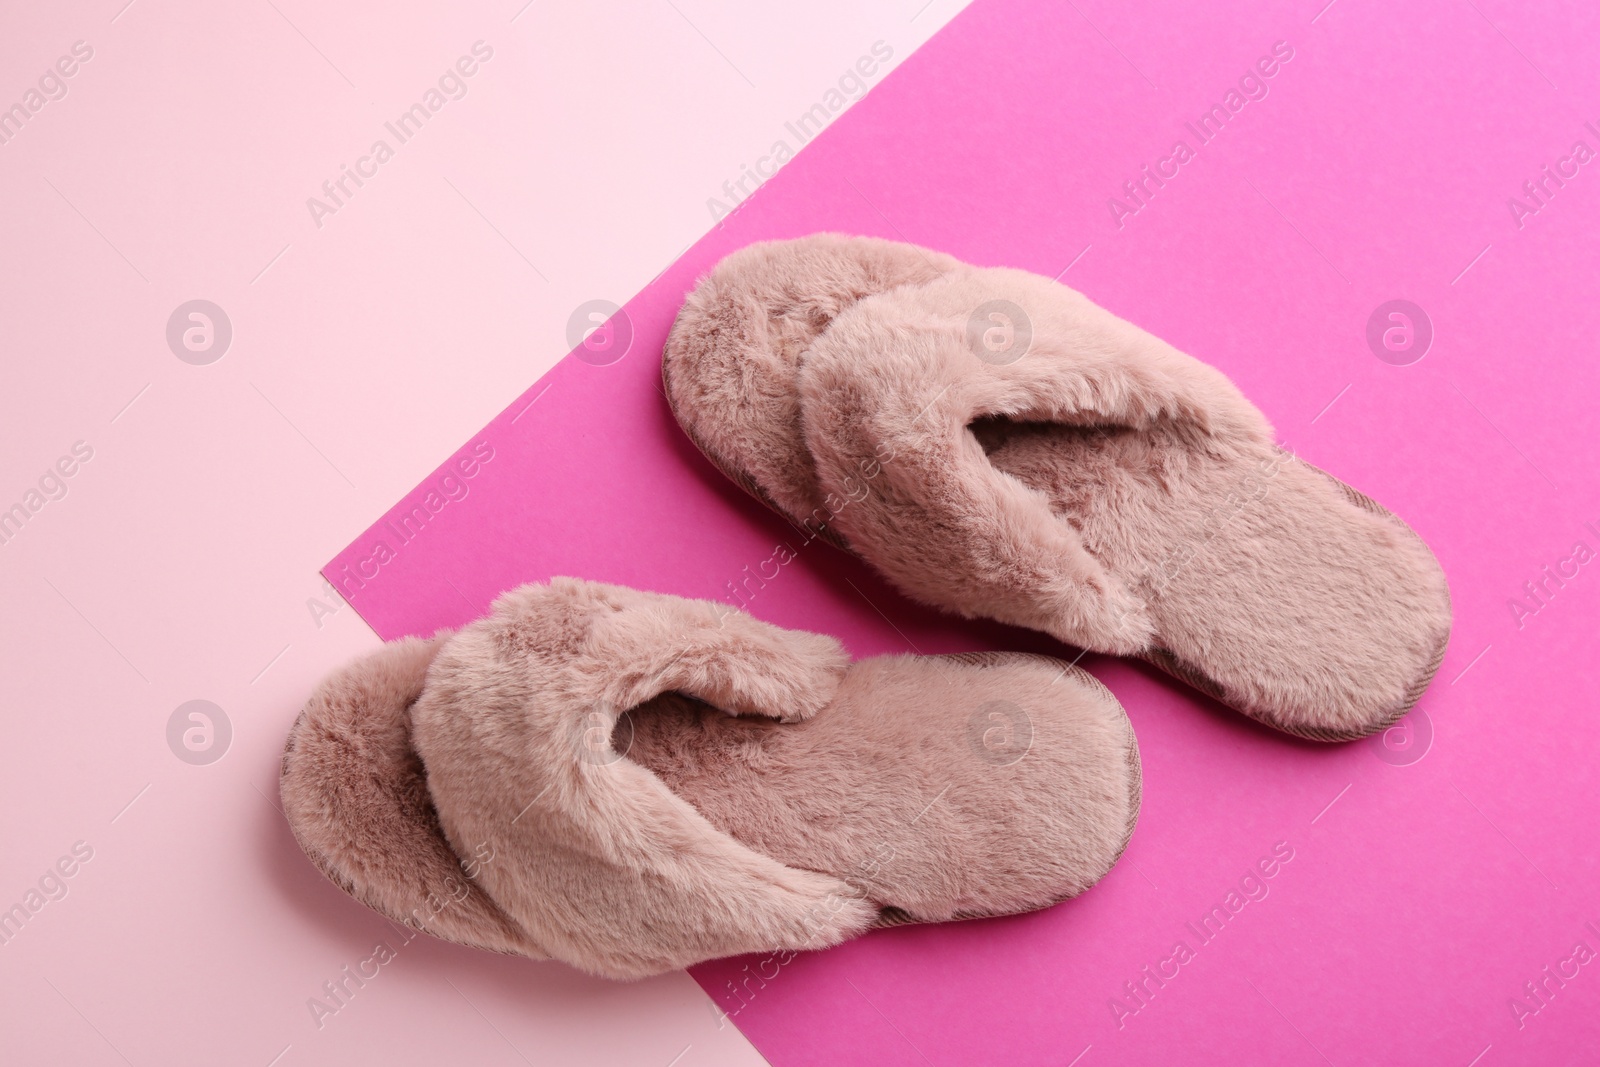 Photo of Pair of stylish soft slippers on color background, flat lay